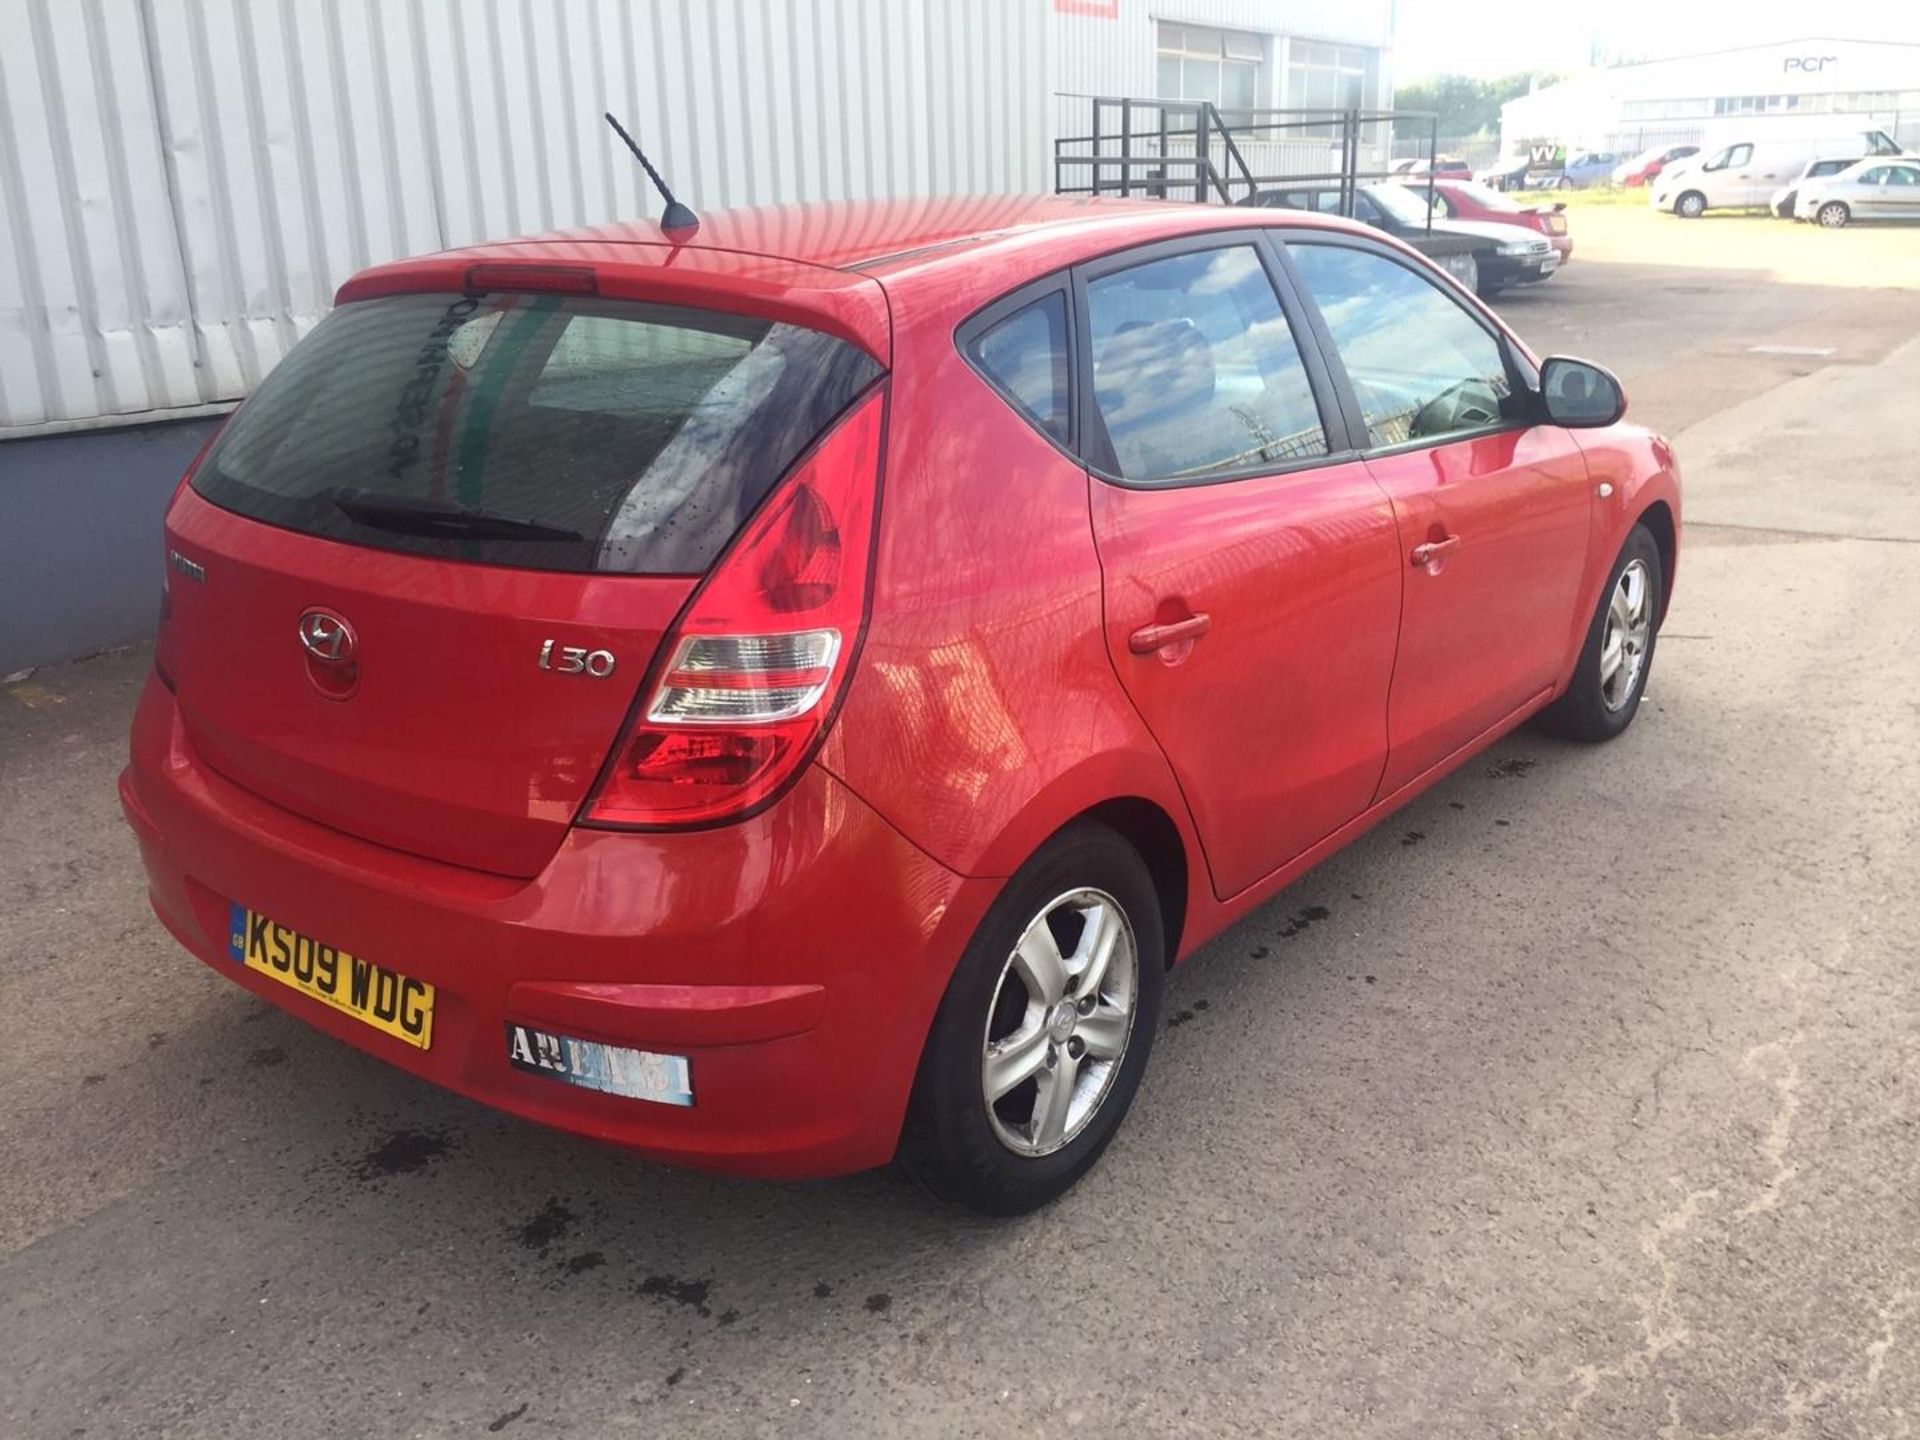 2009 Hyundai i30 Comfort 1.6 Petrol - CL505 - NO VAT ON THE HAMMER - Location: Corby - Image 4 of 11